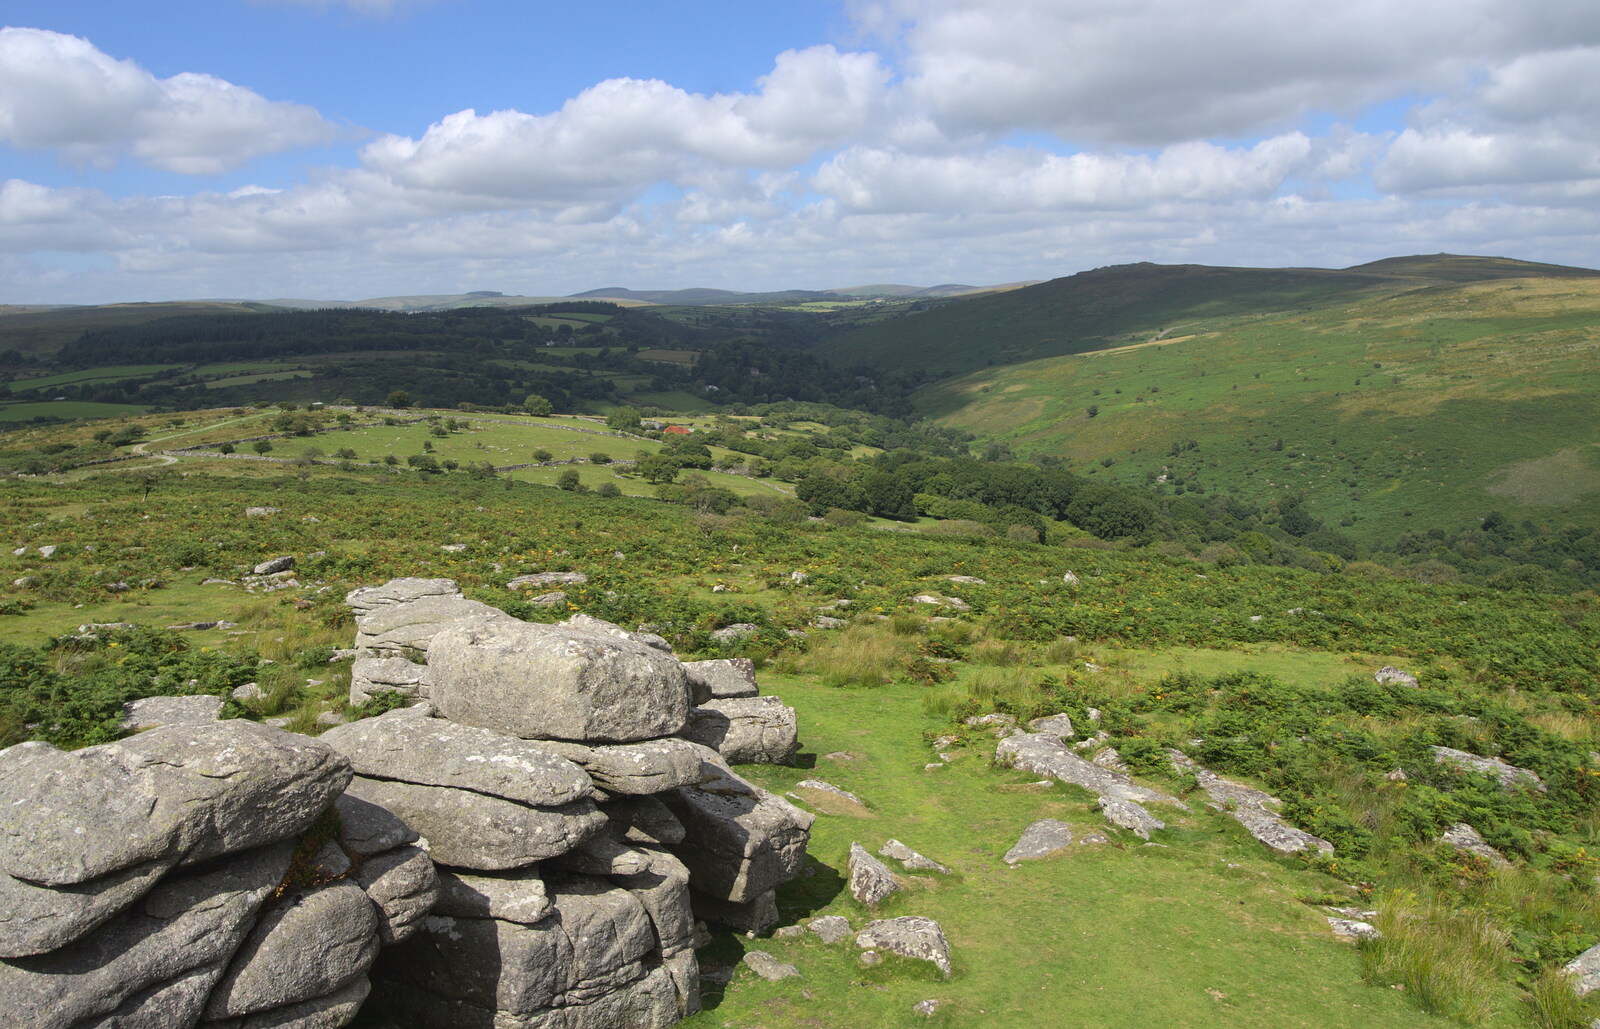 A nice view of Dartmoor from Badger's Holt and Bronze-Age Grimspound, Dartmoor, Devon - 10th August 2016